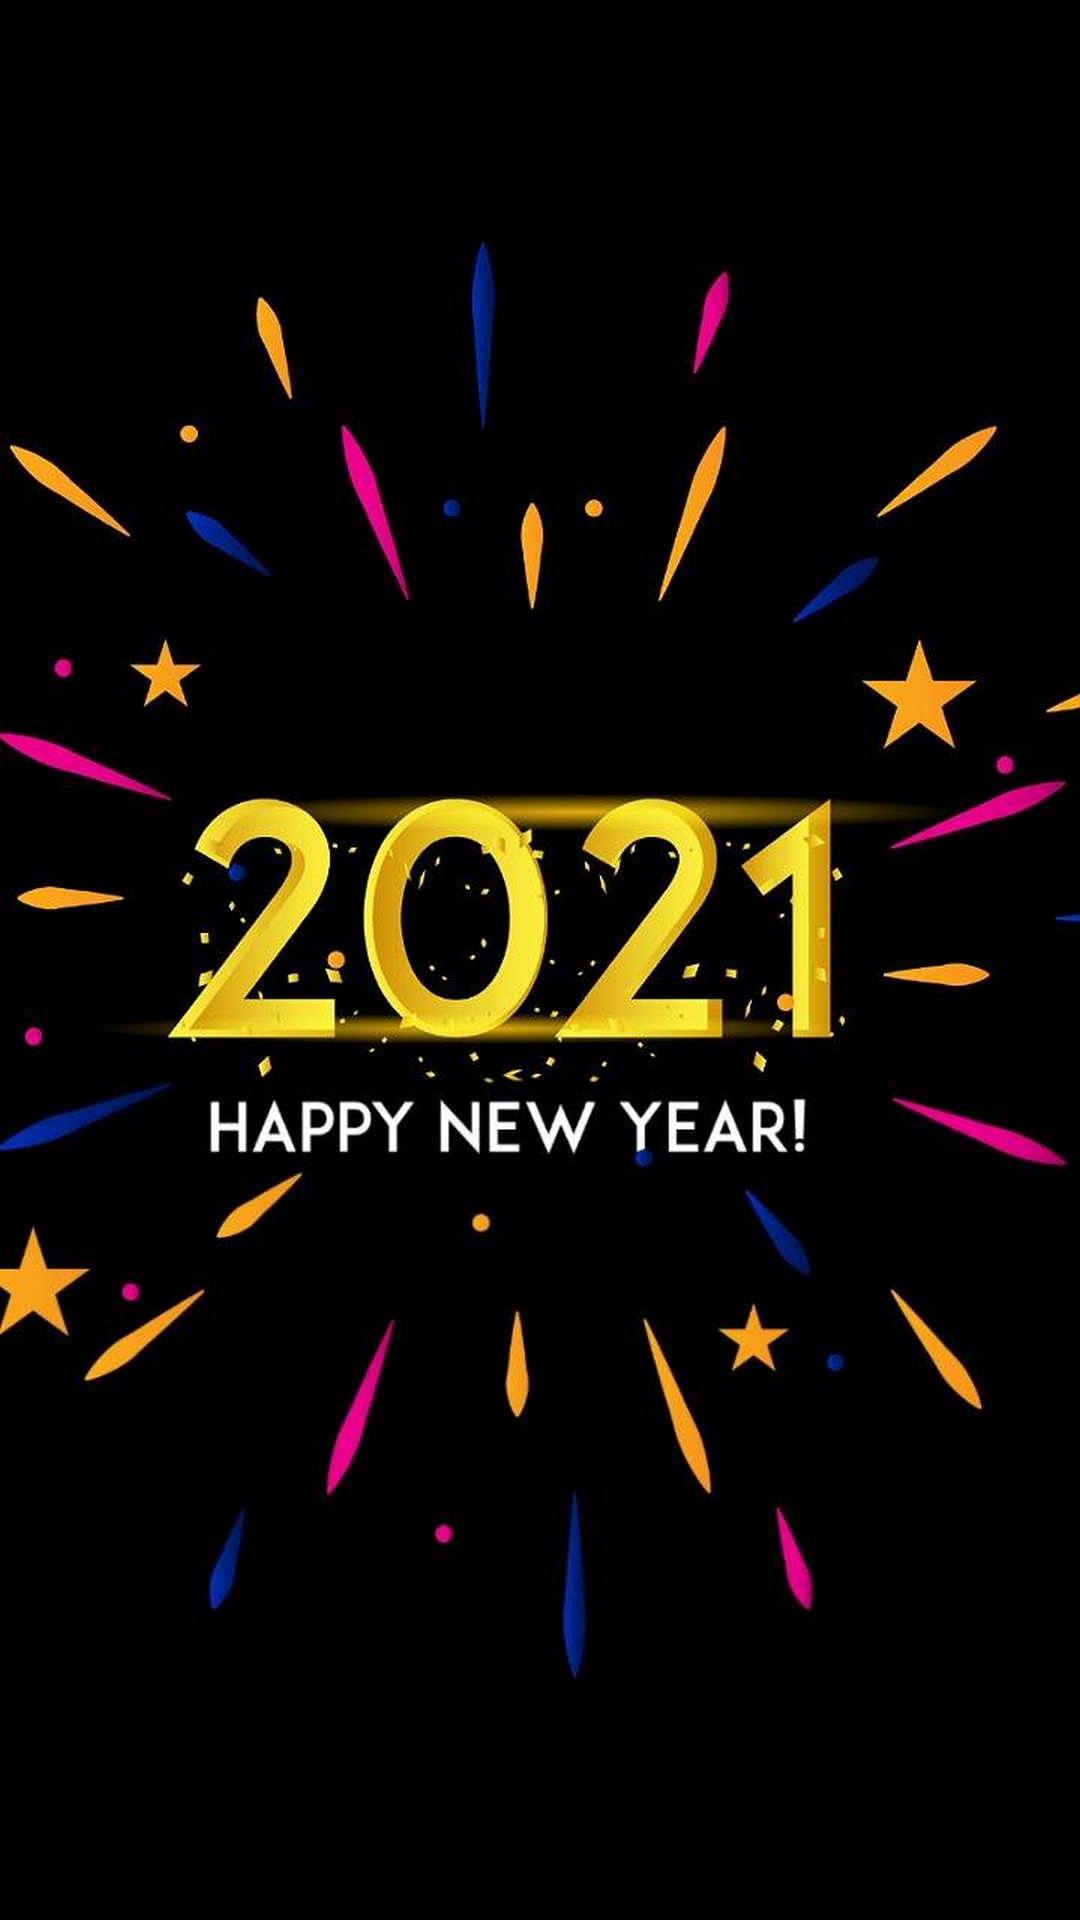 Happy New Year 2021 HD Wallpapers For Android With high-resolution 1080X1920 pixel. You can use this wallpaper for your Android backgrounds, Tablet, Samsung Screensavers, Mobile Phone Lock Screen and another Smartphones device